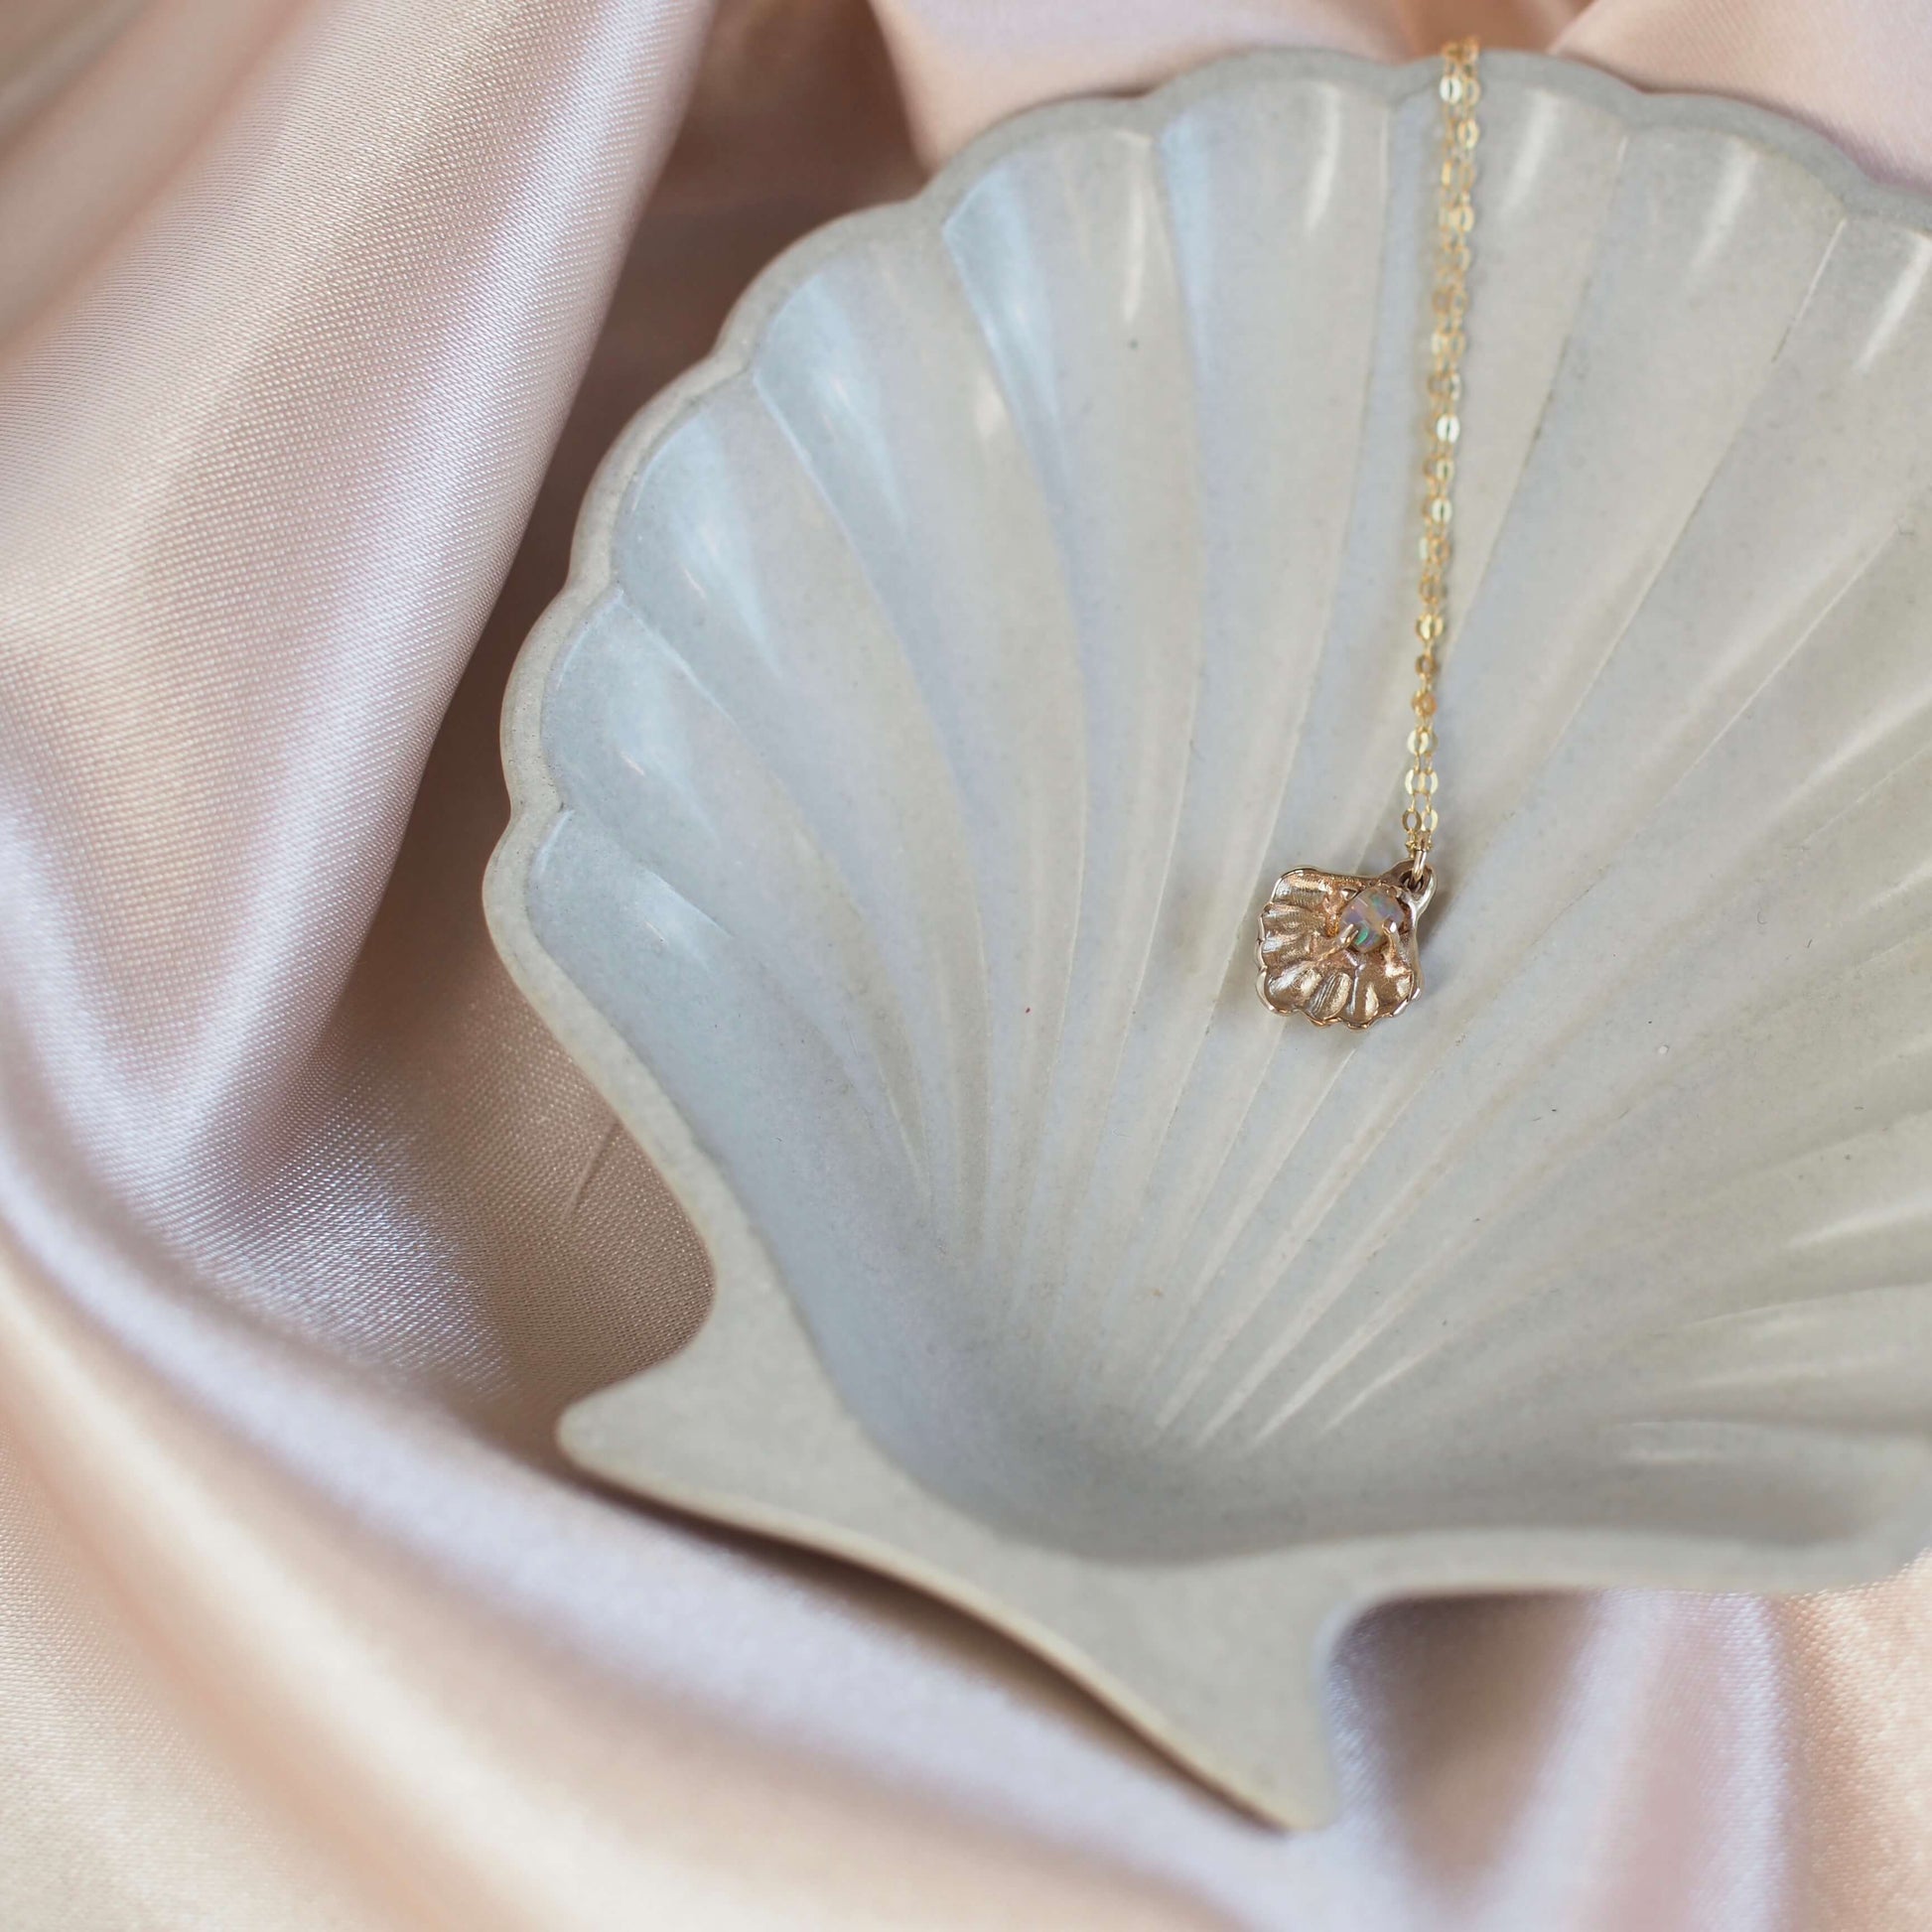 Close up of a gold tone Seashell necklace containing a tiny opal in place of a pearl, handmade by Iron Oxide Designs on a shell jewelry plate